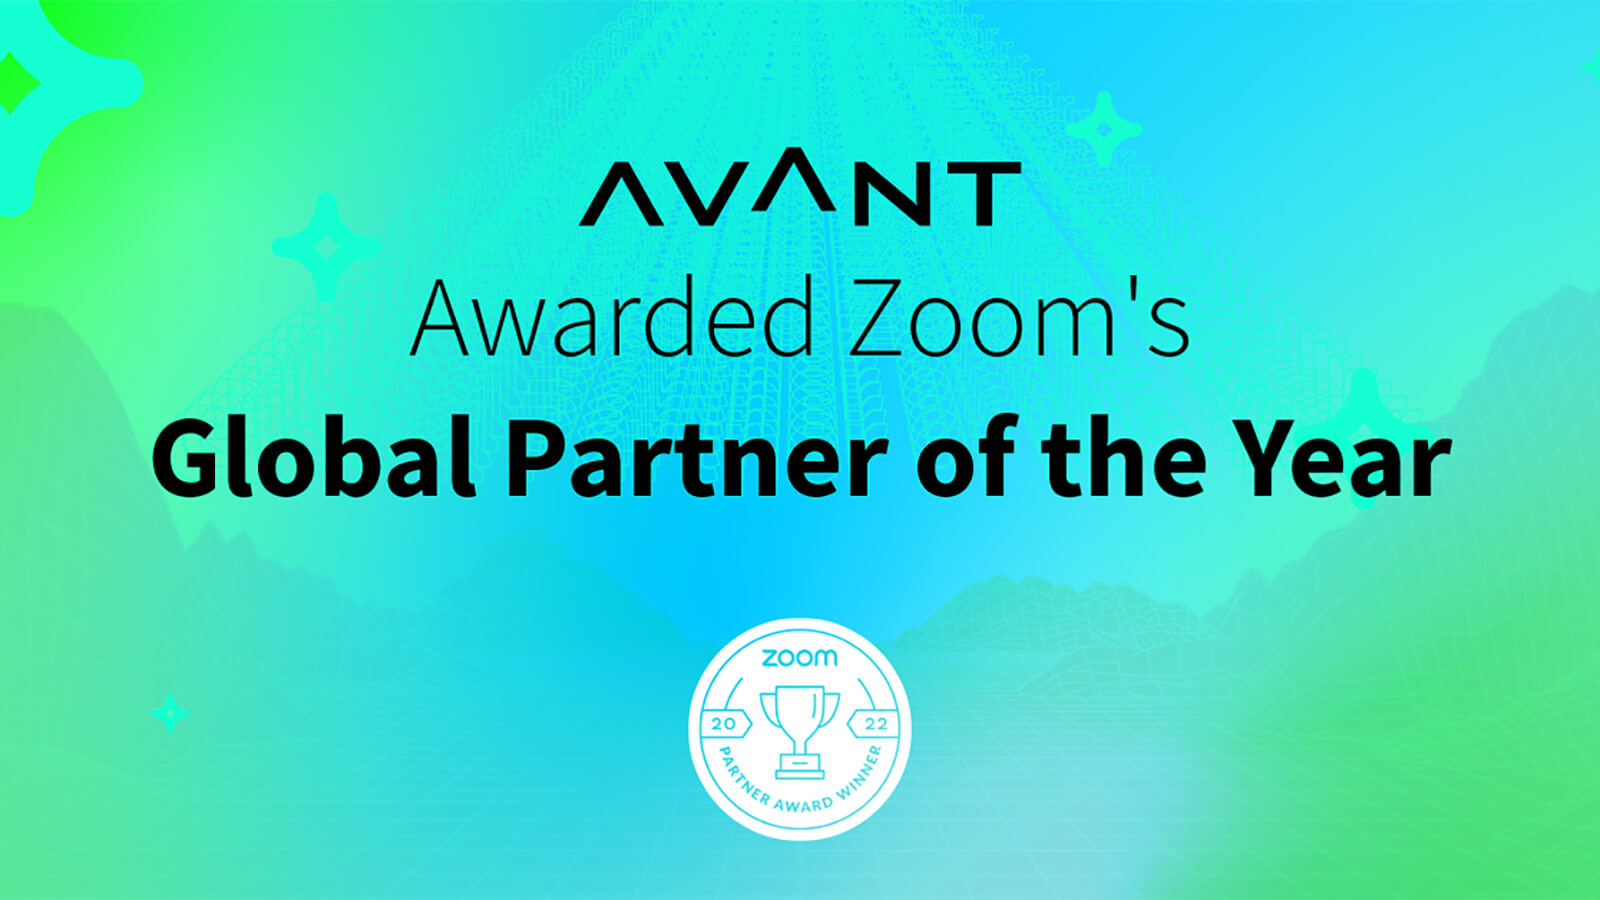 AVANT Recognized by Zoom Video Communications as its Global Partner of the Year